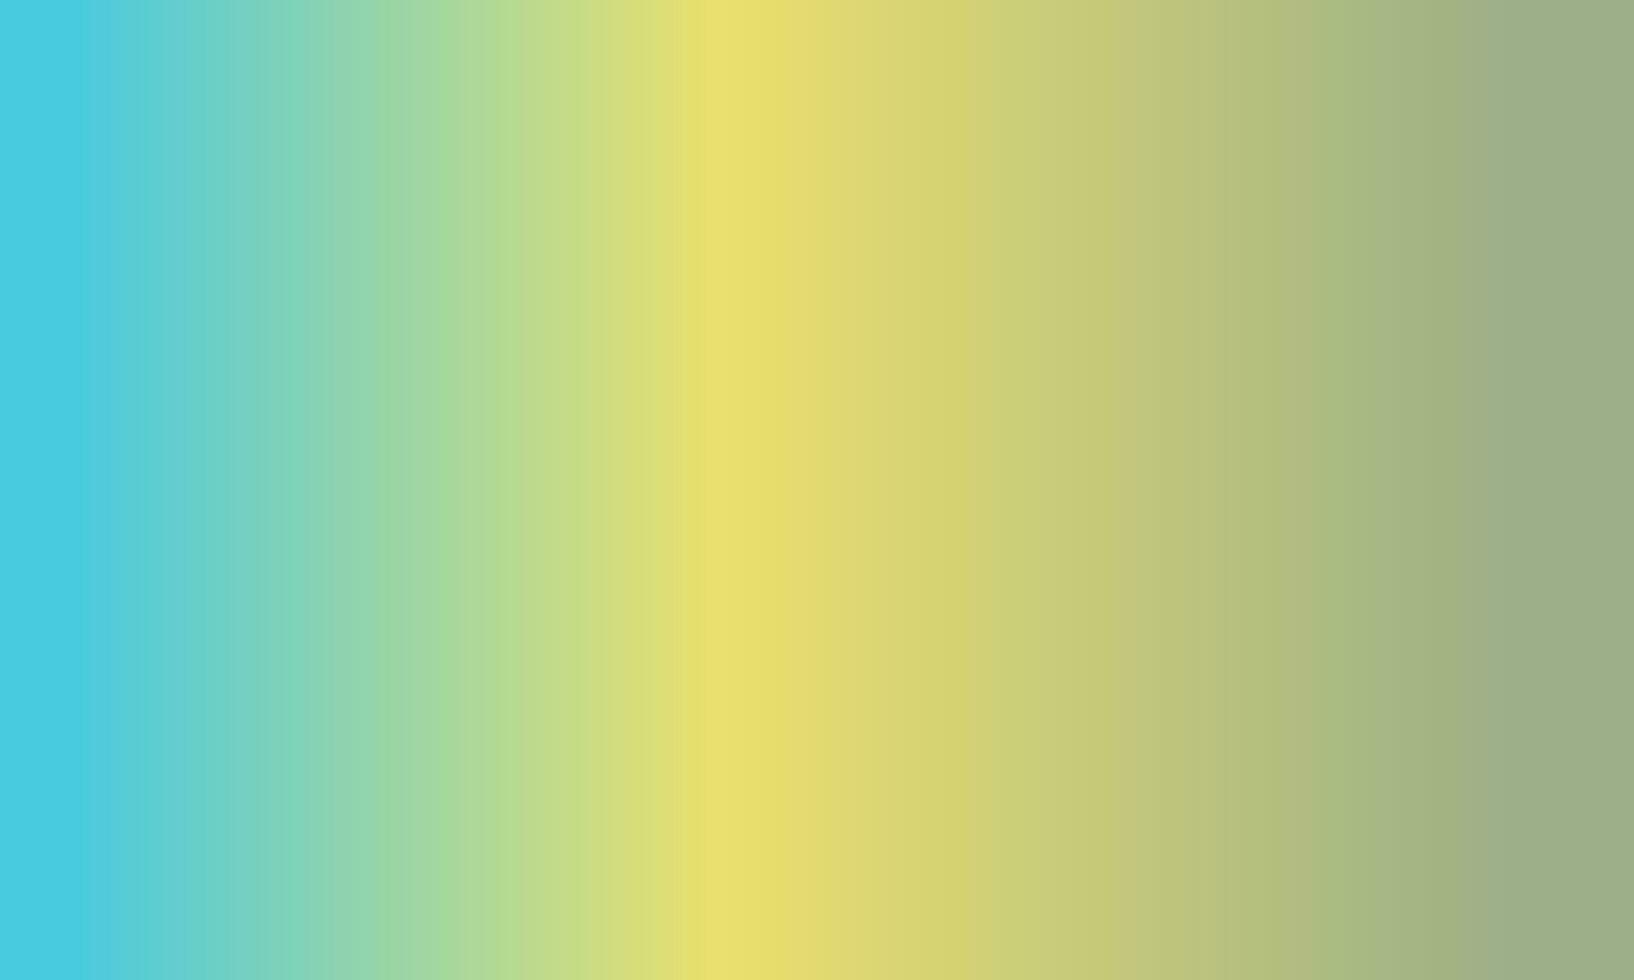 Design simple sage green,cyan and yellow gradient color illustration background photo